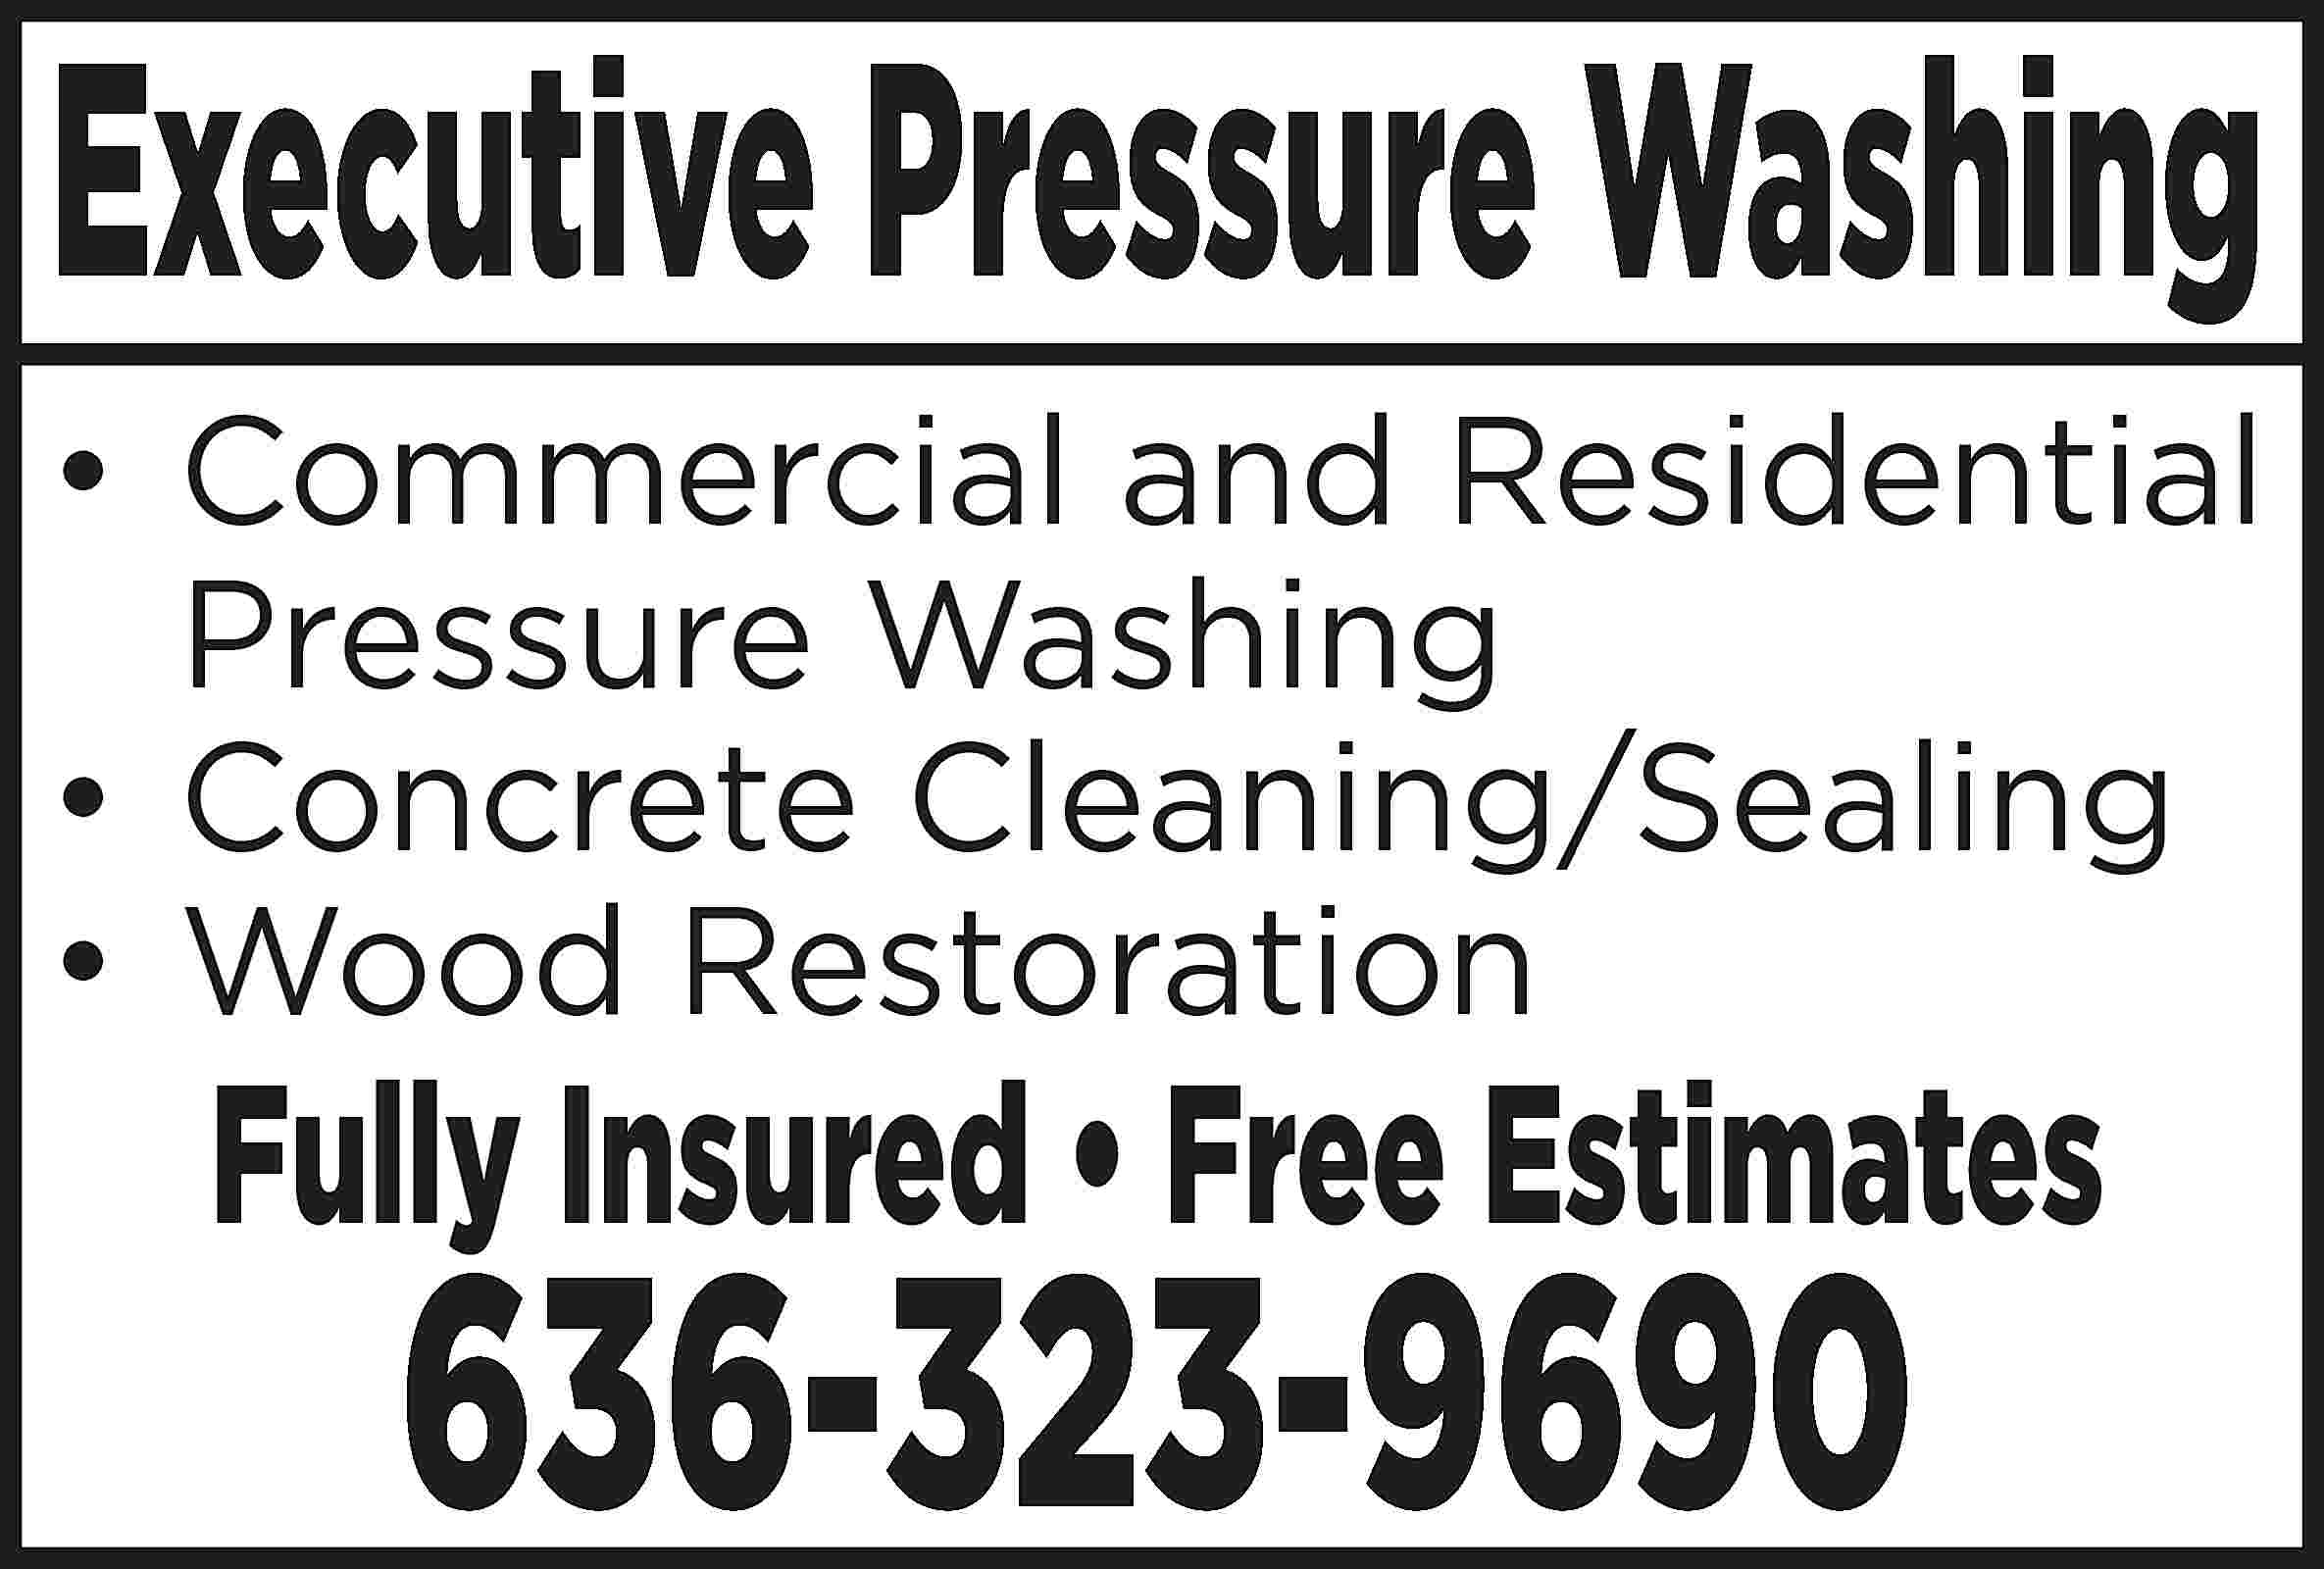 Executive Pressure Washing •	Commercial and  Executive Pressure Washing •	Commercial and Residential Pressure Washing •	Concrete Cleaning/Sealing •	Wood Restoration Fully Insured • Free Estimates 636-323-9690